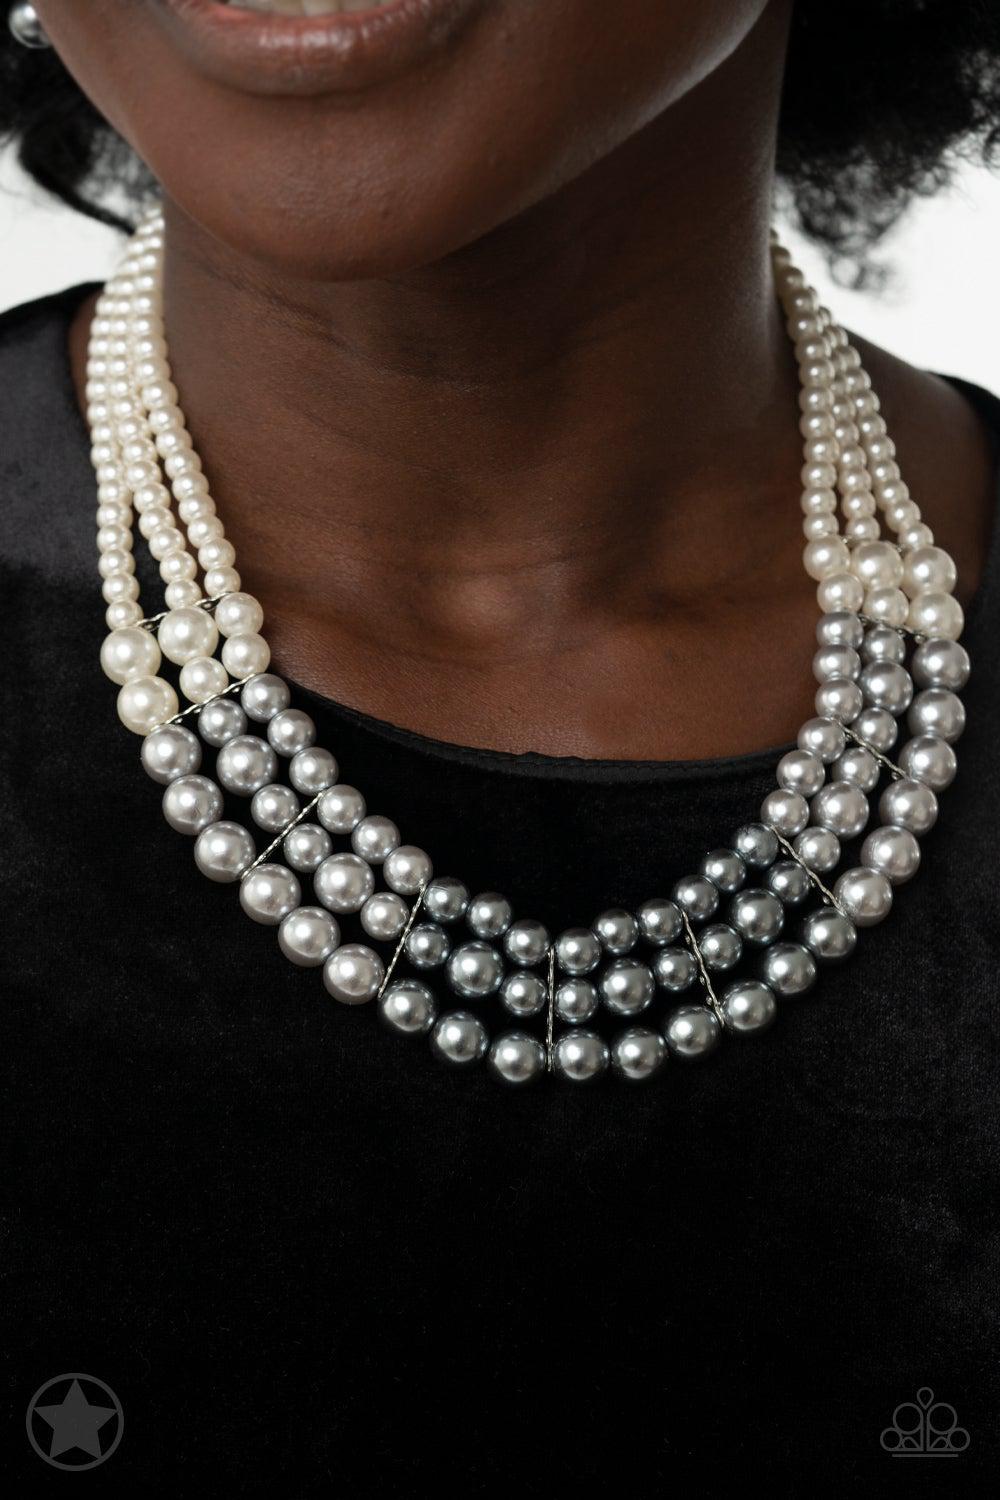 Lady in Waiting White and Silver Pearl Necklace and matching Earrings - Paparazzi Accessories - lightbox -CarasShop.com - $5 Jewelry by Cara Jewels